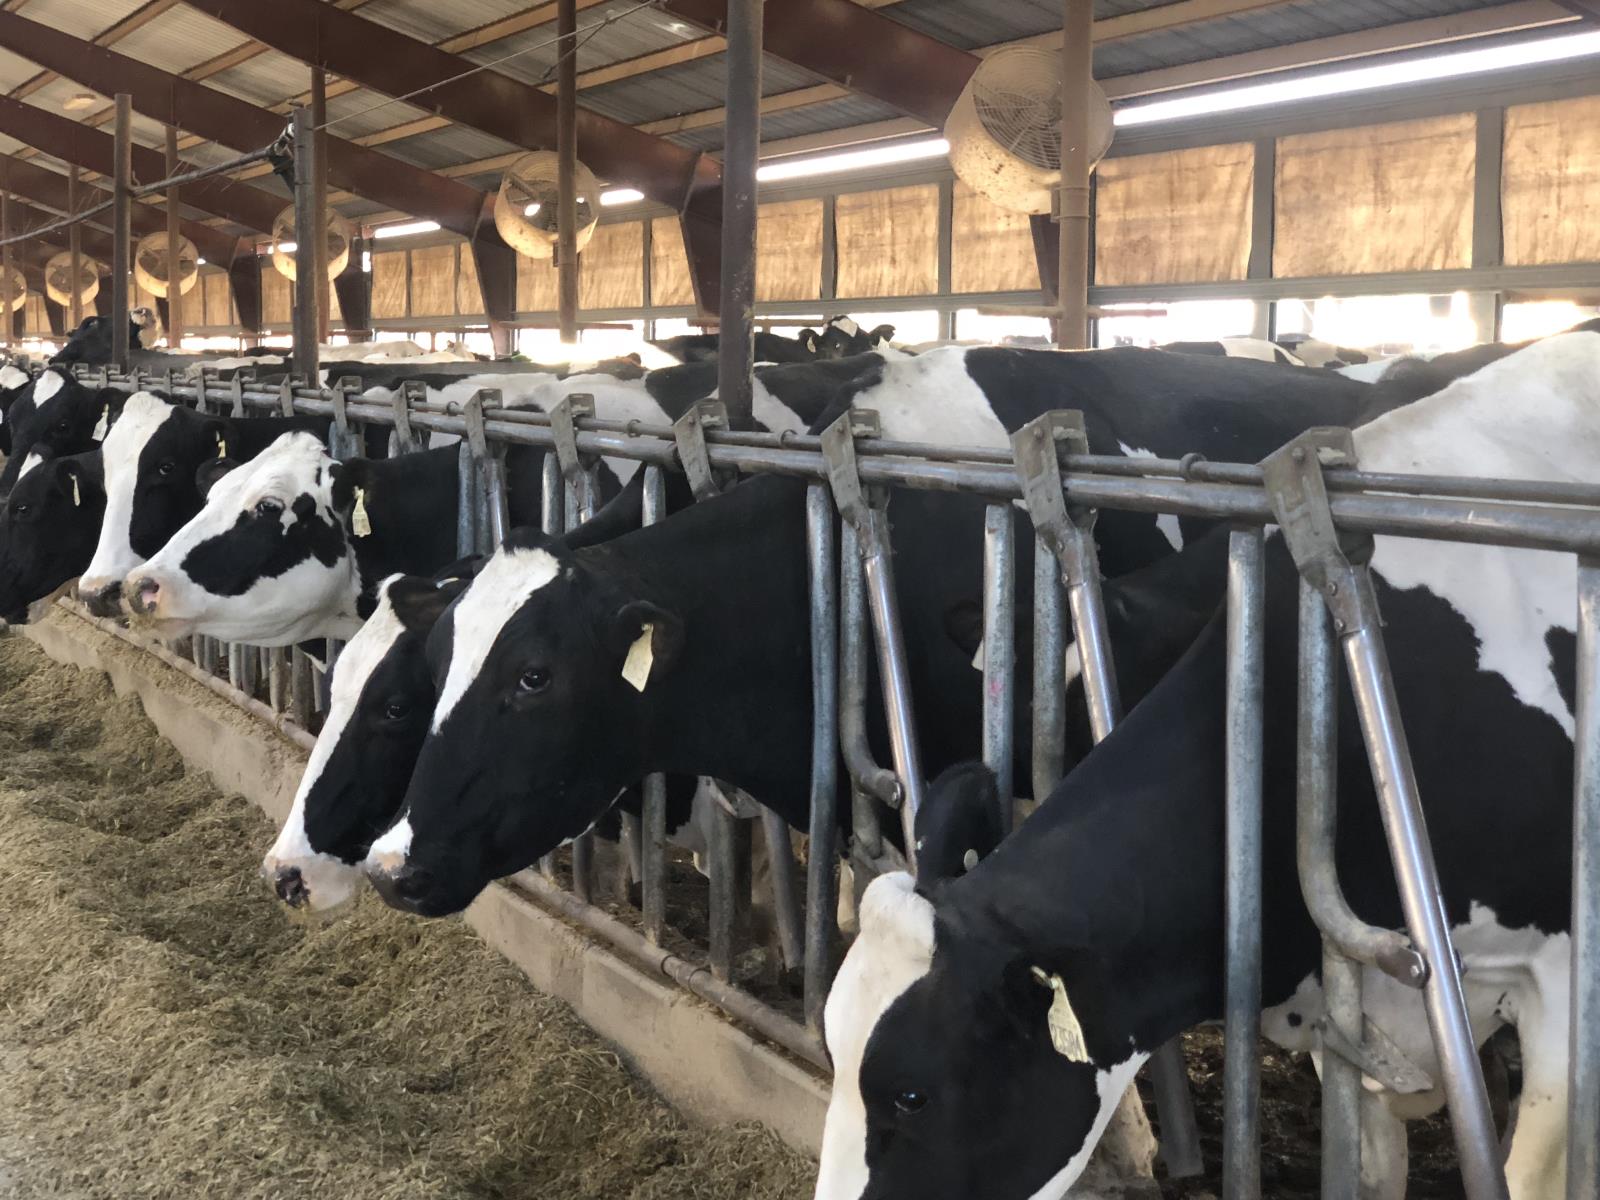 The price that Idaho dairies receive for their milk has rebounded sharply since nearing all-time lows just 45 days ago.